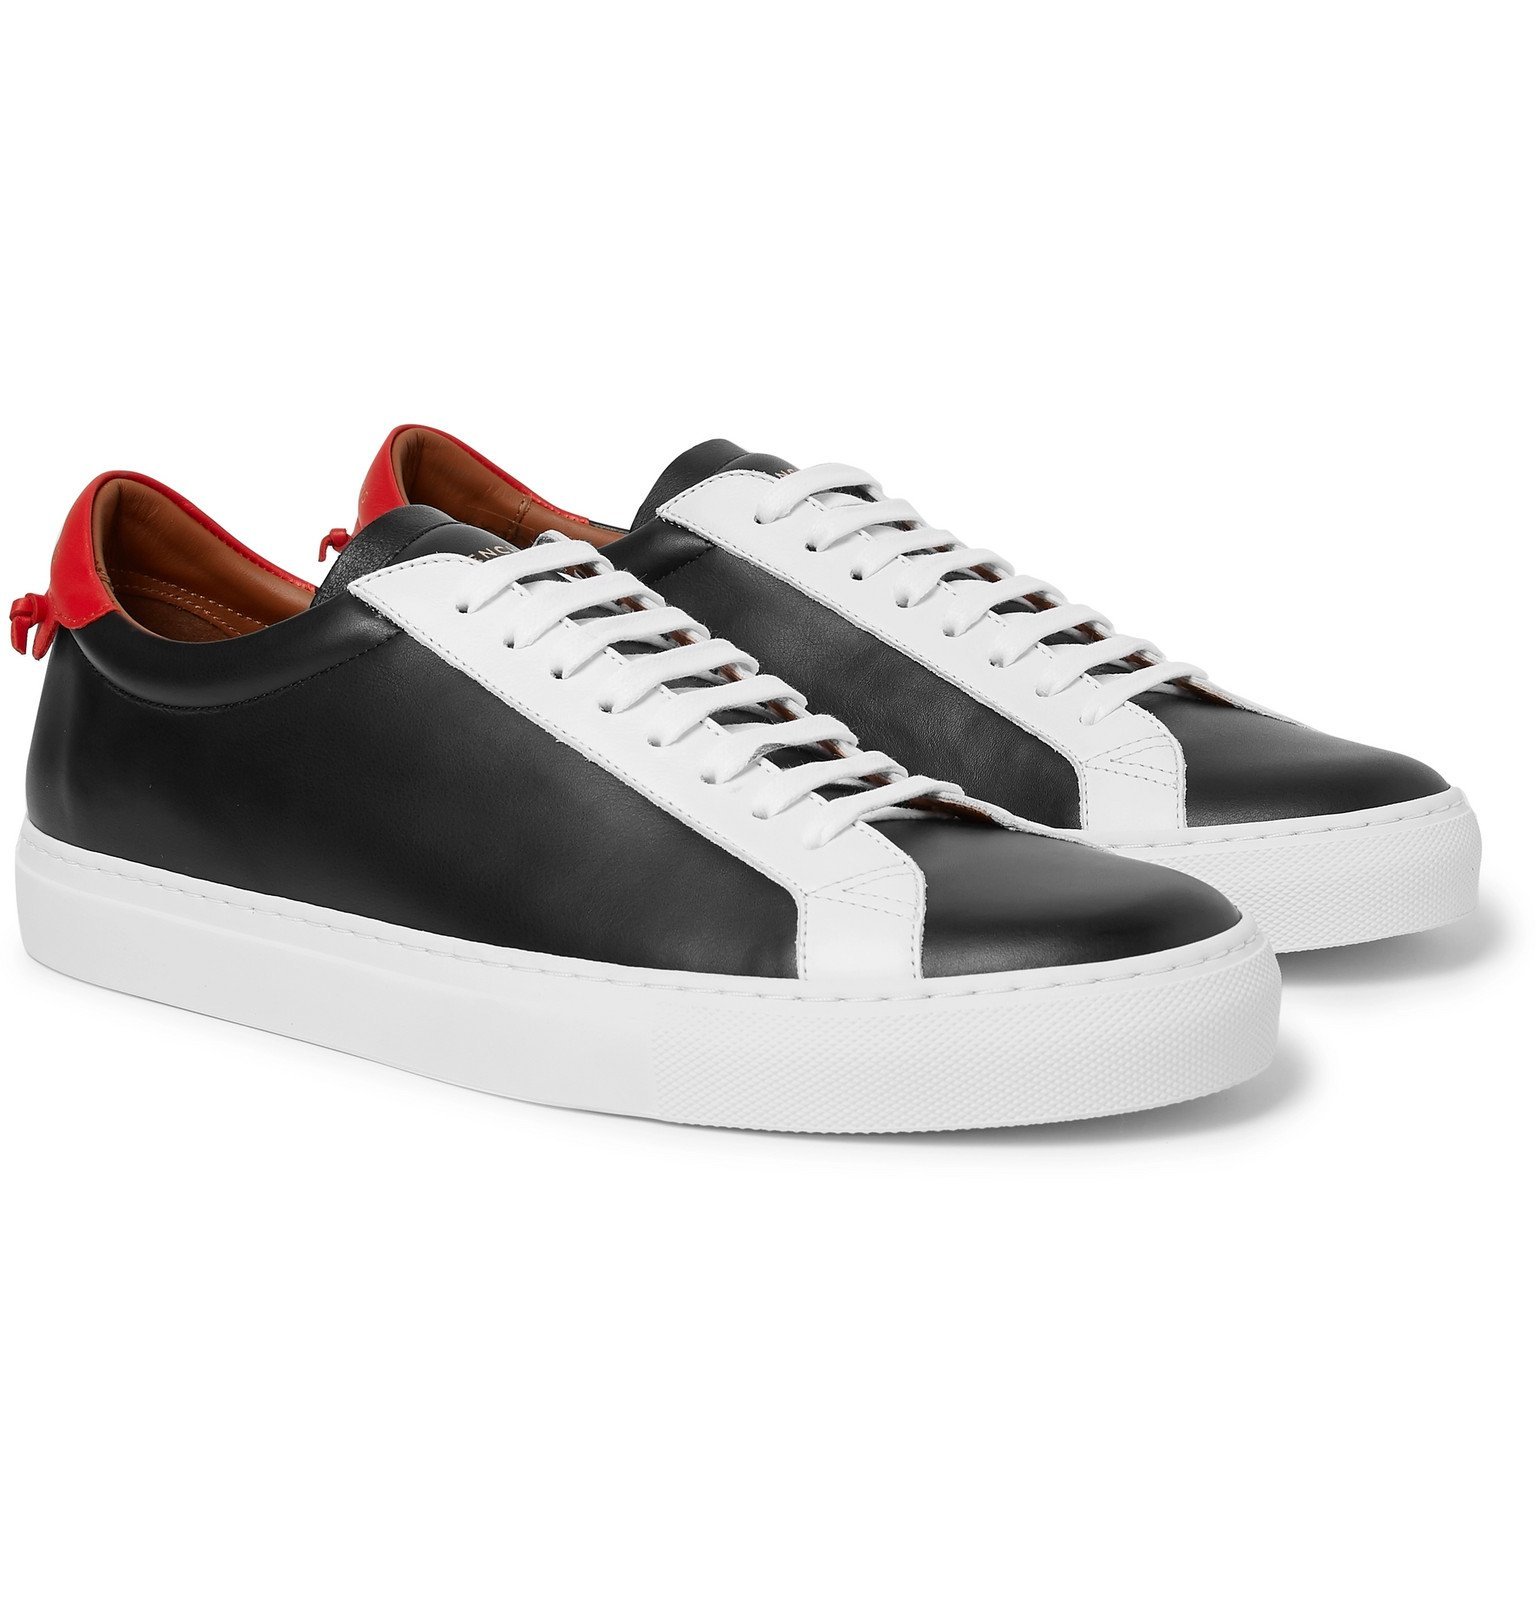 givenchy urban street sneakers black